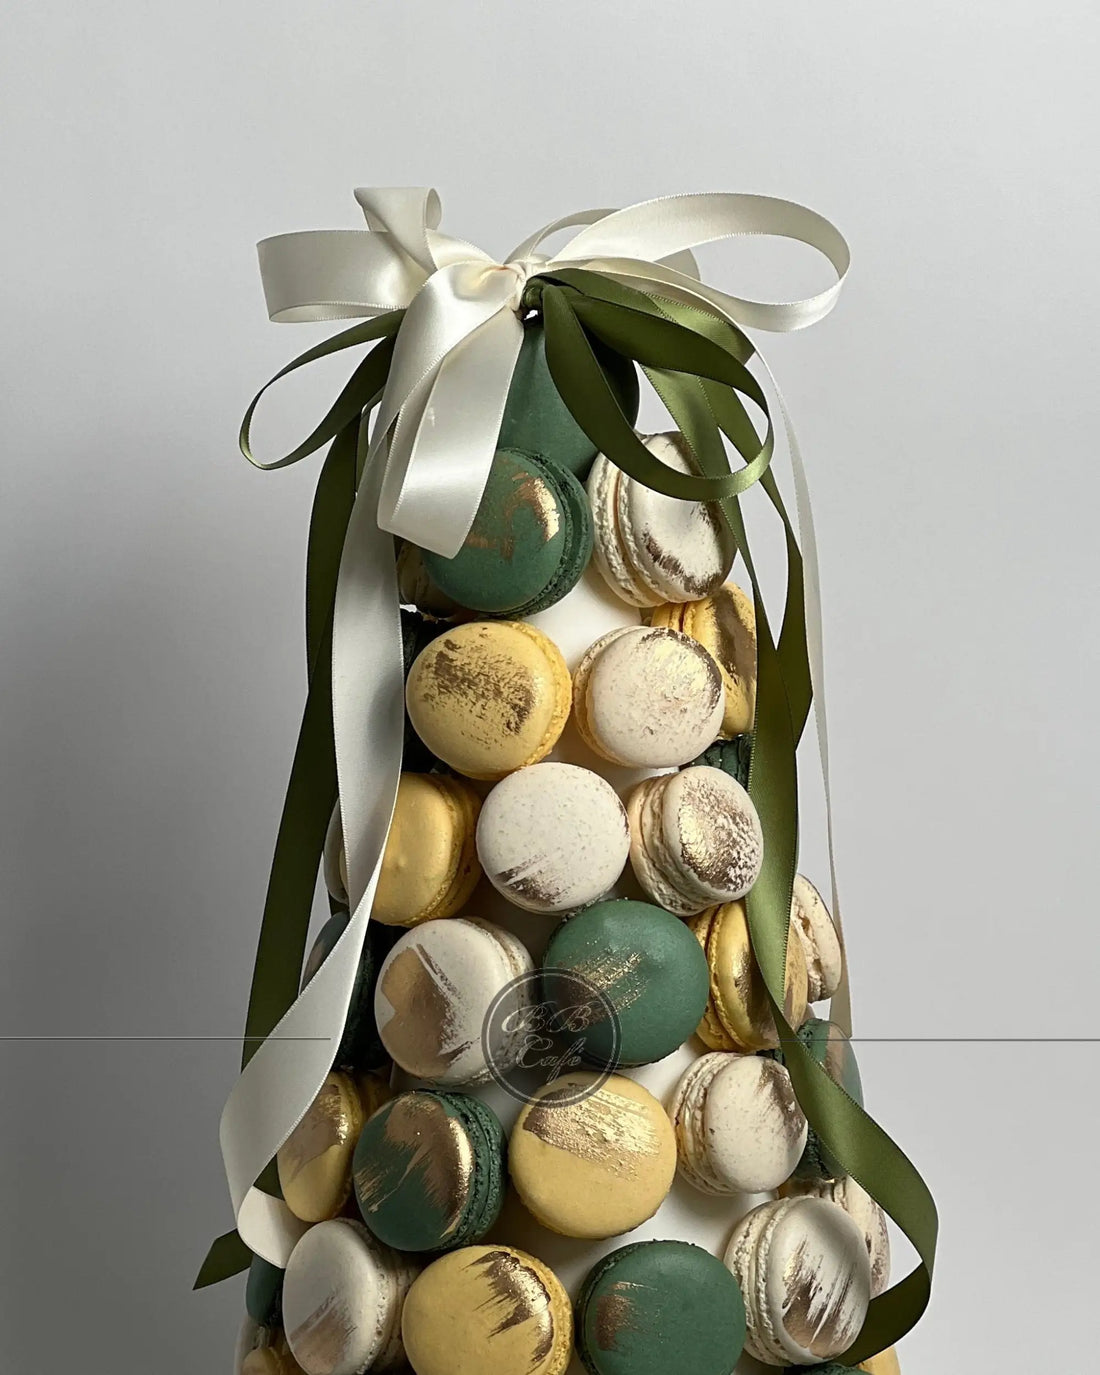 Macaron tower - special pastry